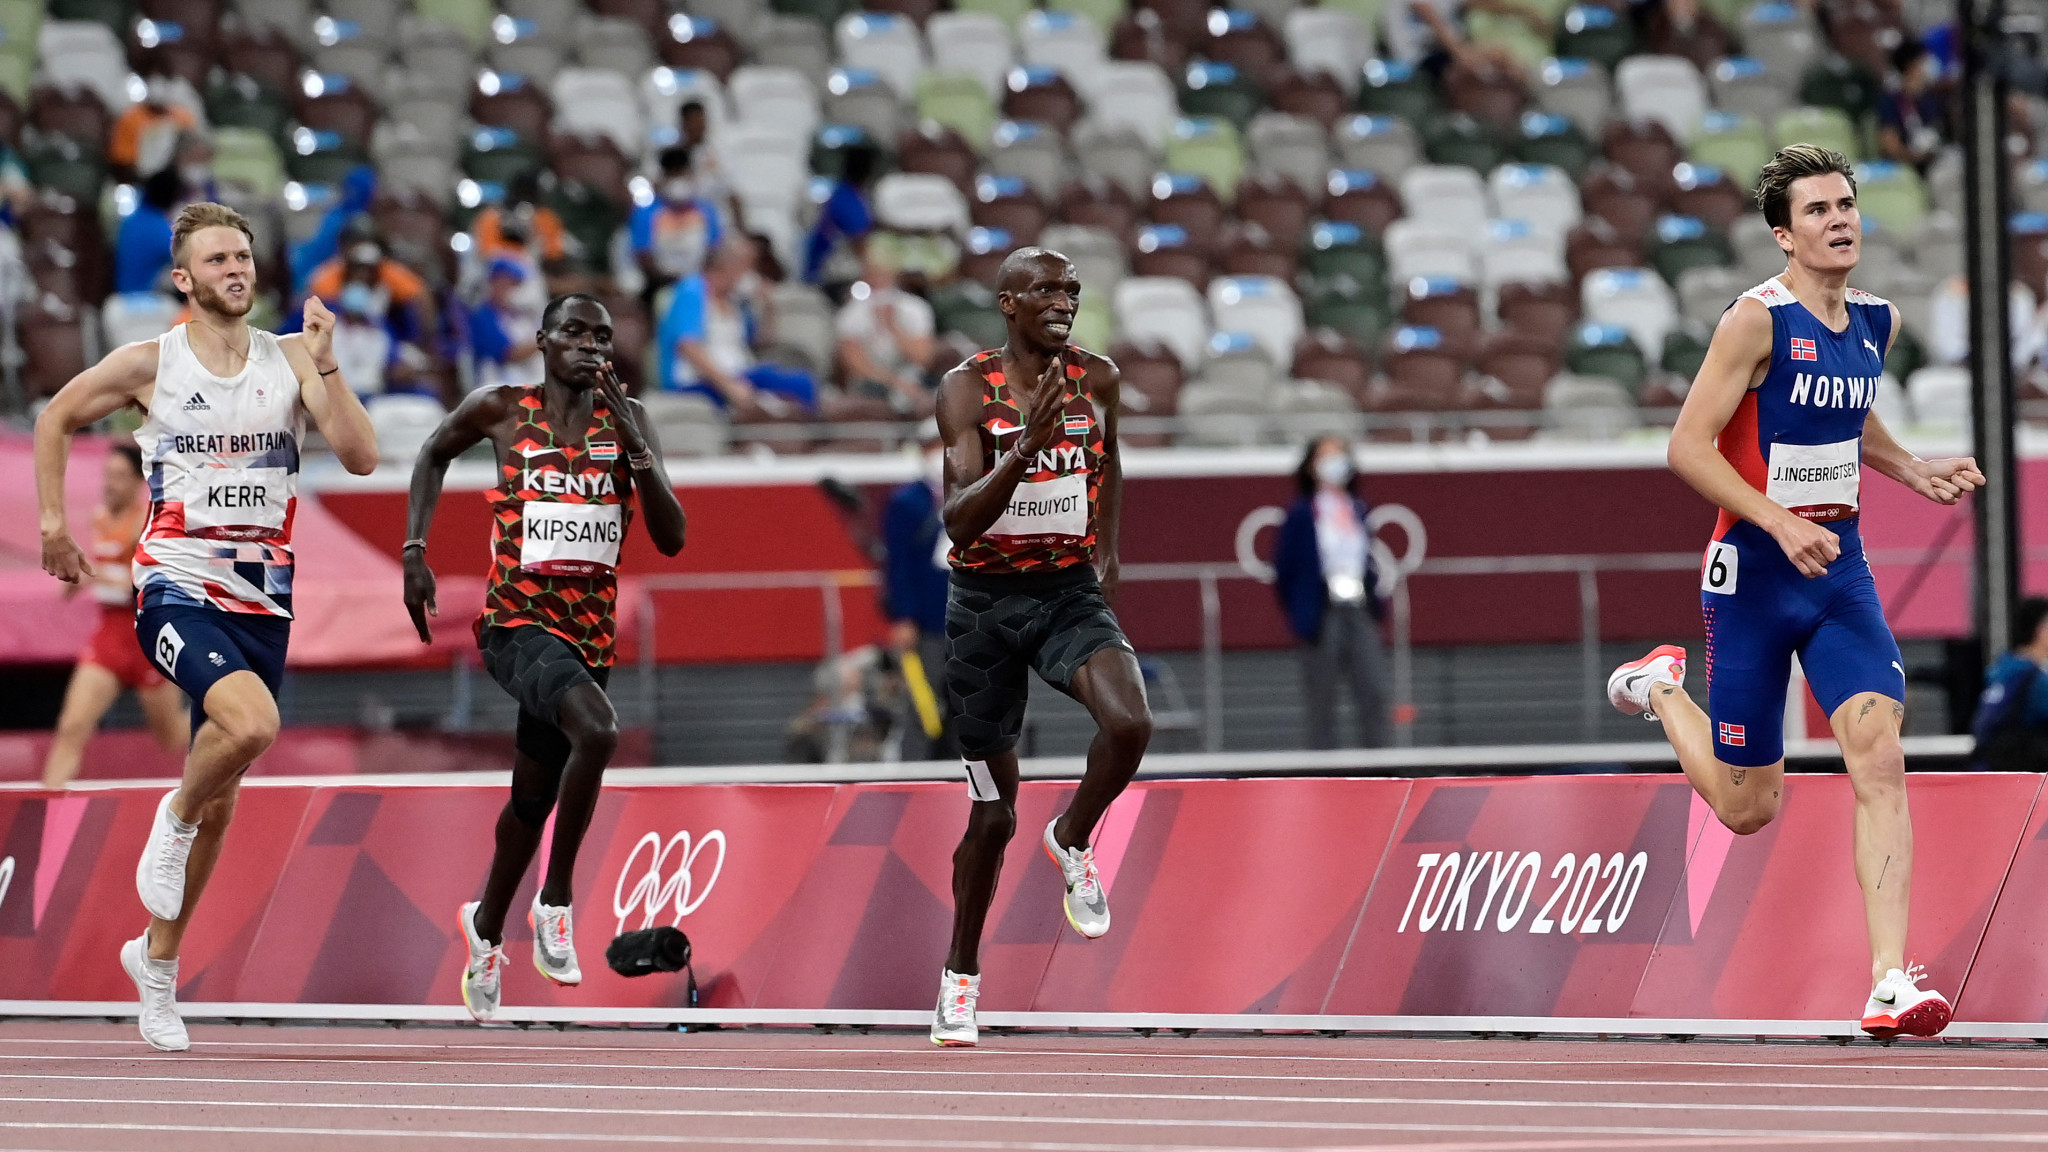 After 12 consecutive defeats by Kenya's world 1500m champion Timothy Cheruyiot, Norway's 20-year-old Jakob Ingebrigtsen reversed the roles in the Olympic 1500m final ©Getty Images